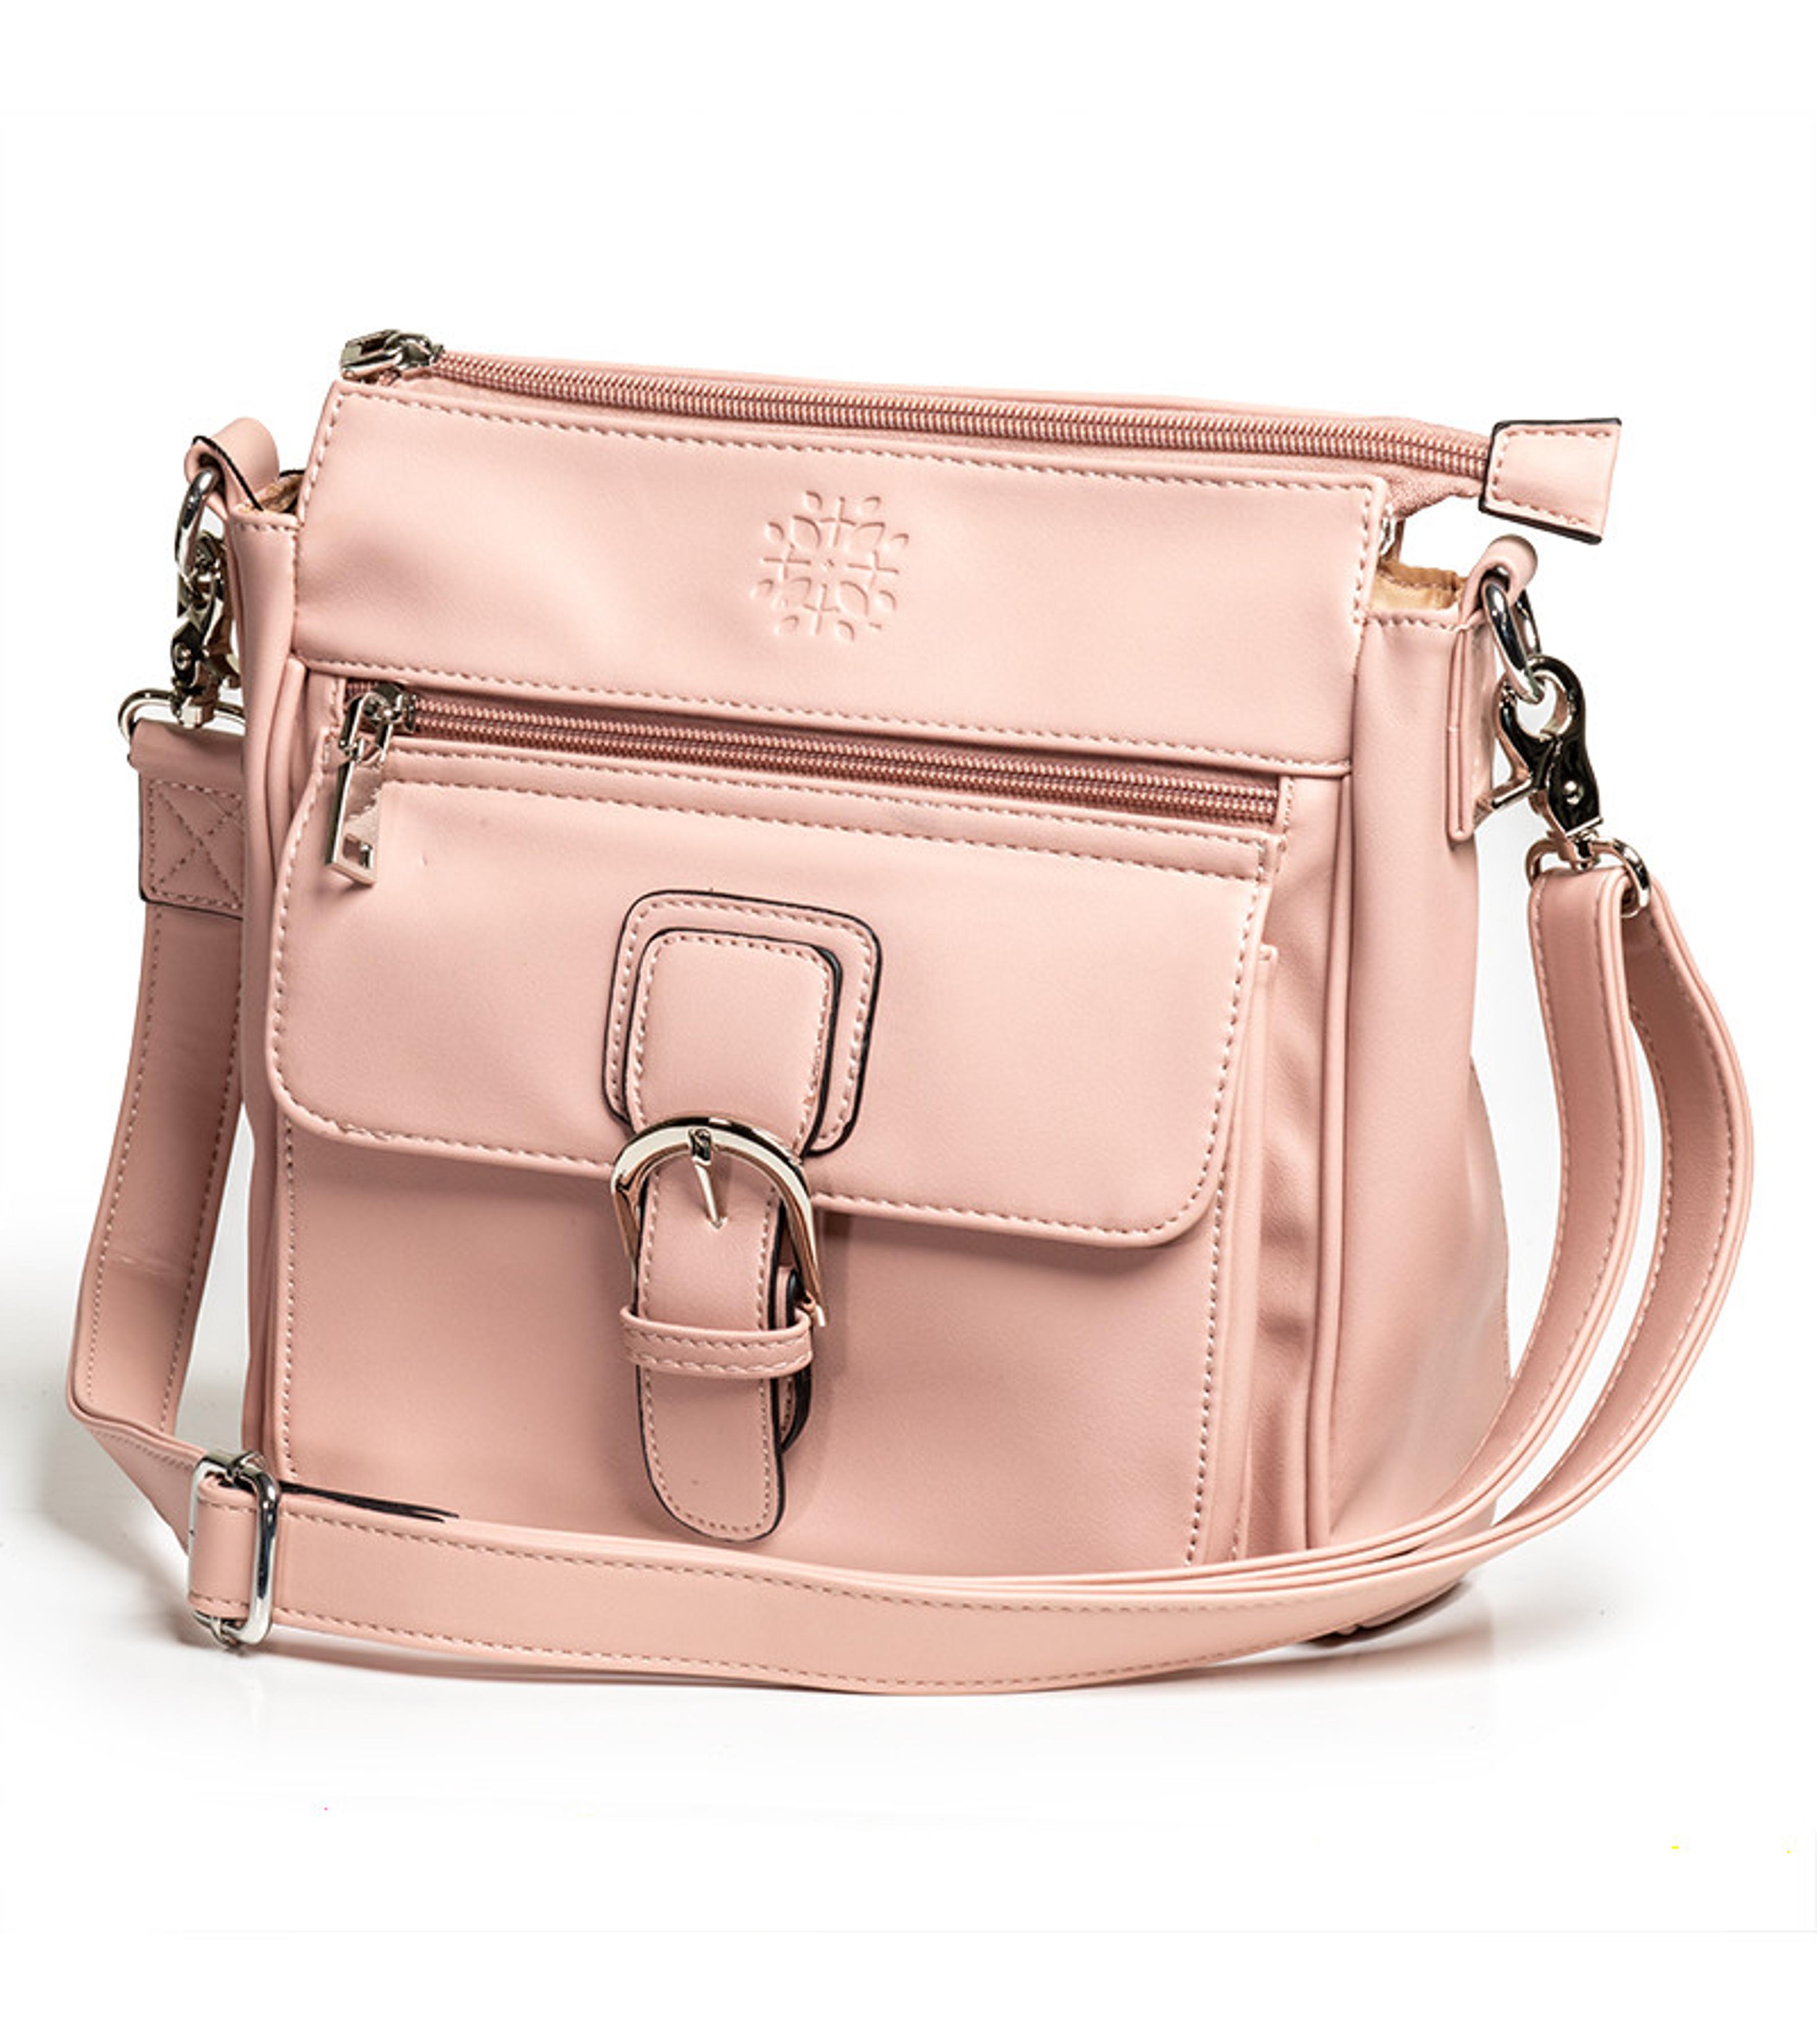 Bags | Handbags With Studdeds And Crossbody Strap With Wallet Set 2pcs Pink  | Poshmark